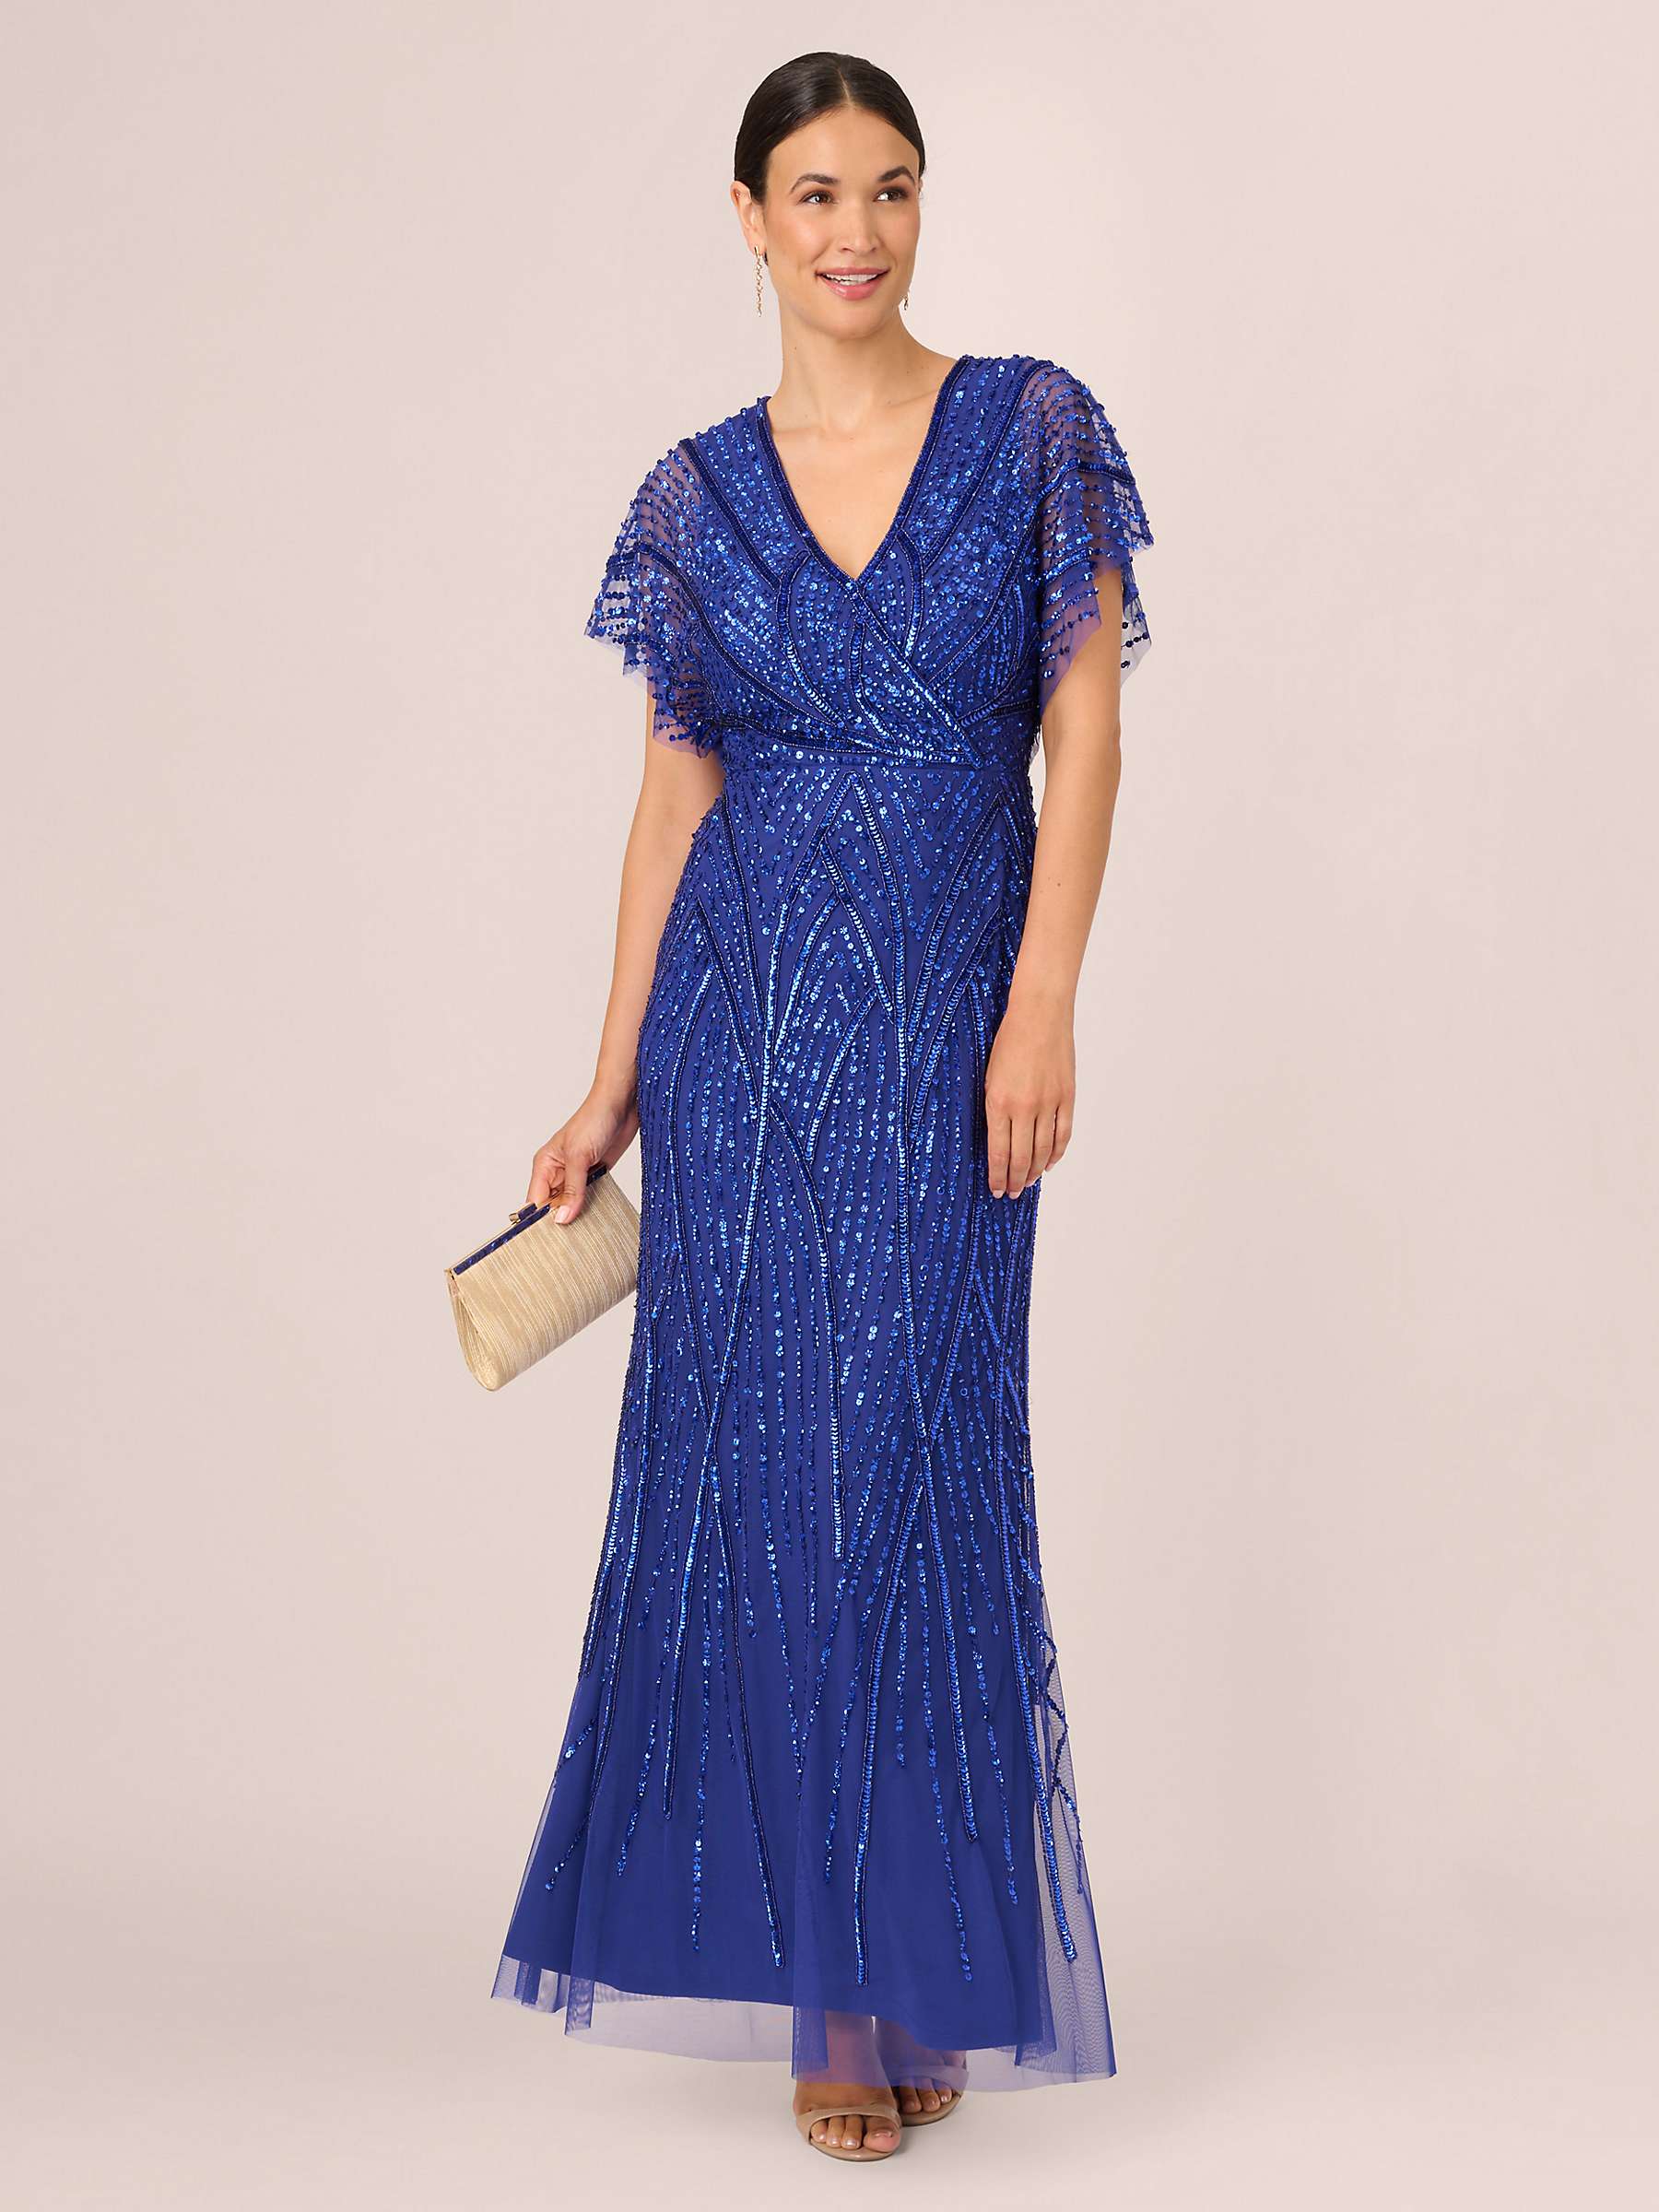 Adrianna Papell Long Beaded Dress, Ultra Blue at John Lewis & Partners